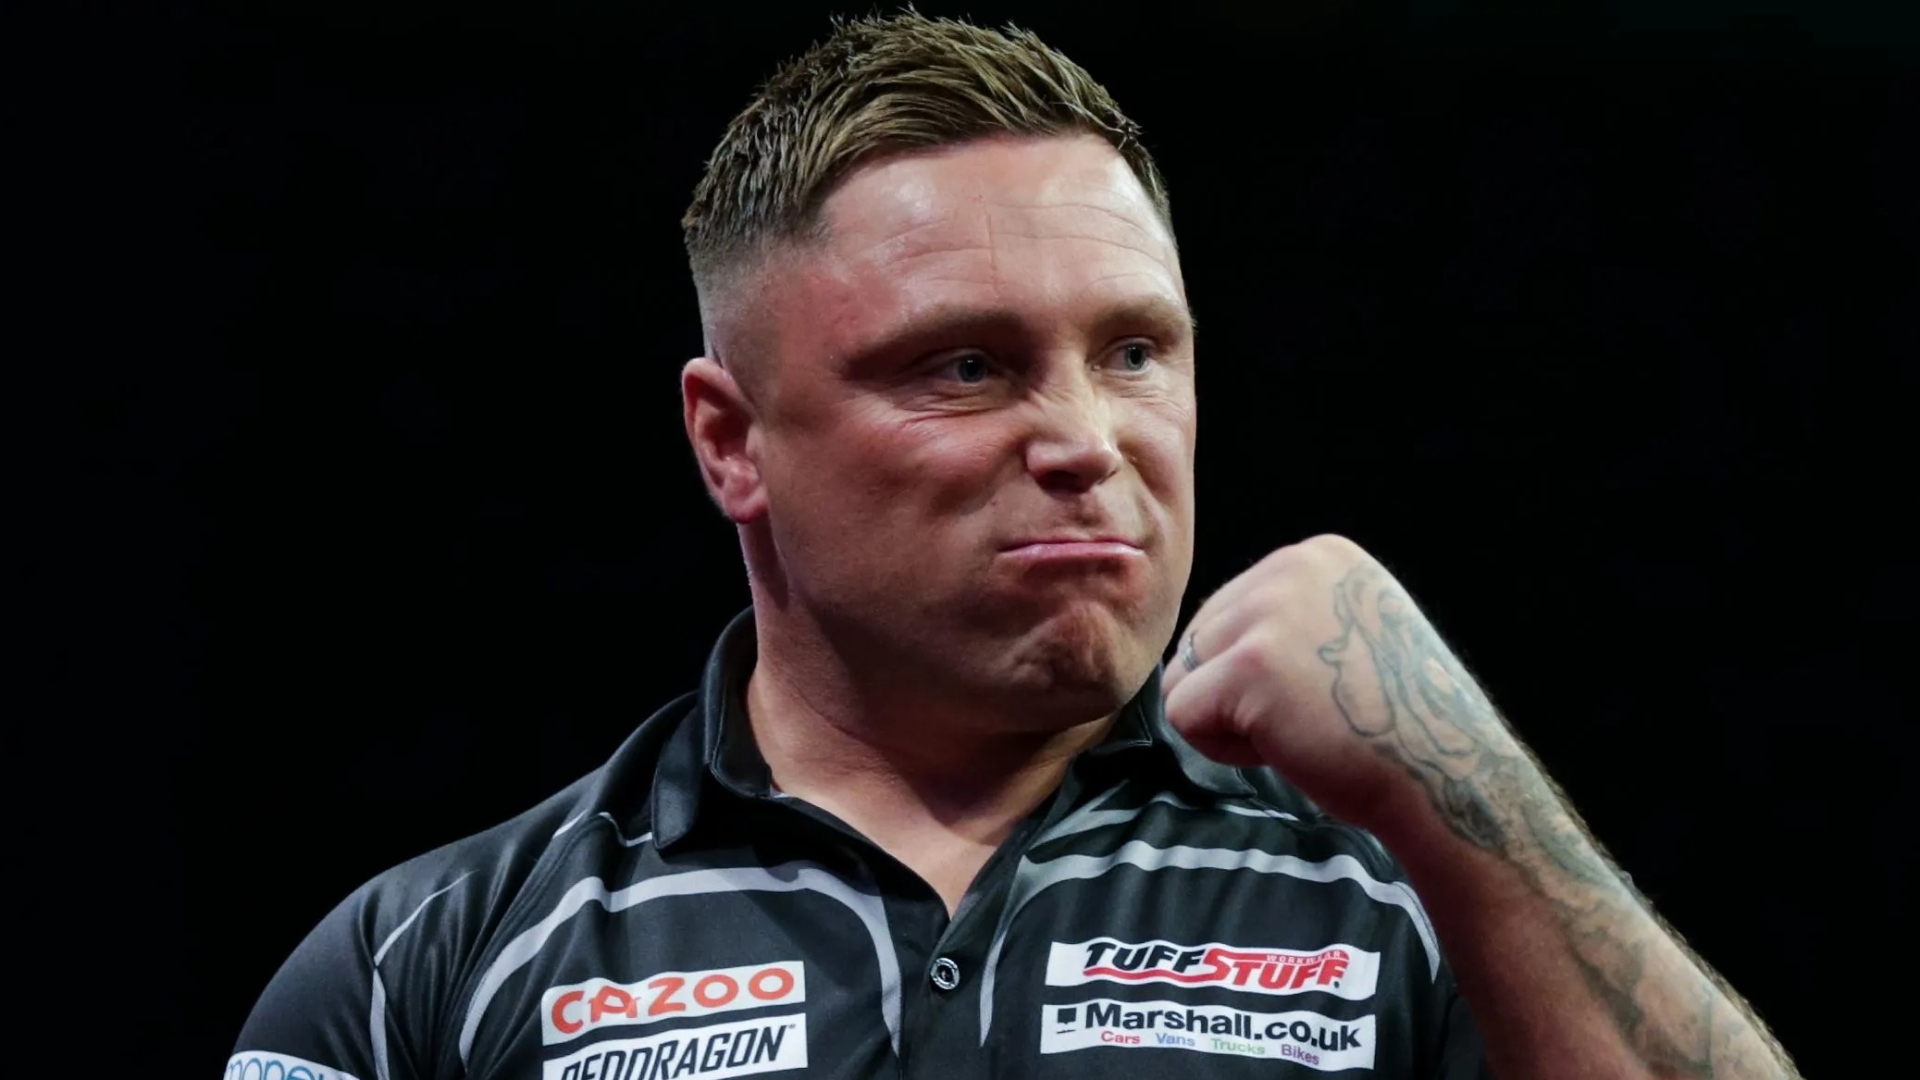 Darts ace Price's charity boxing bout KO'd due to broken hand - but NOT sparring